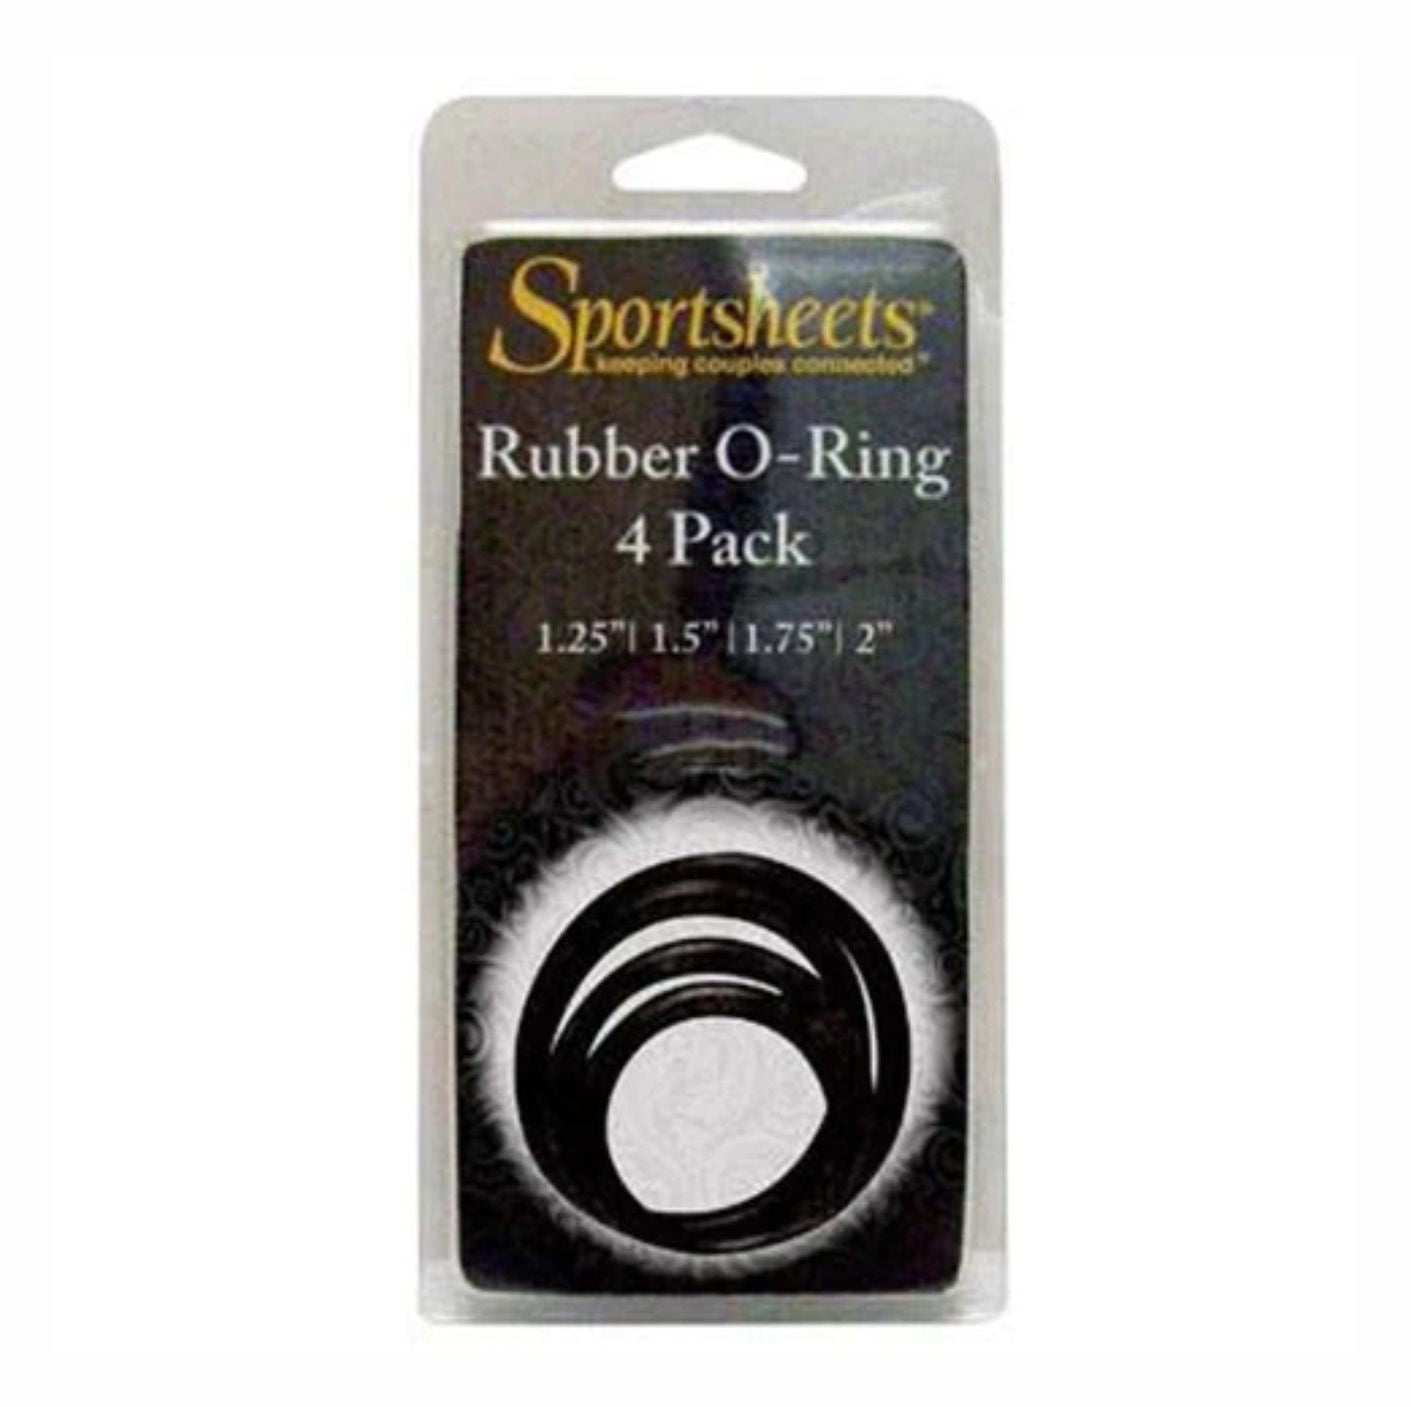 Sportsheets Rubber O-Ring 4-Pack 1.25"